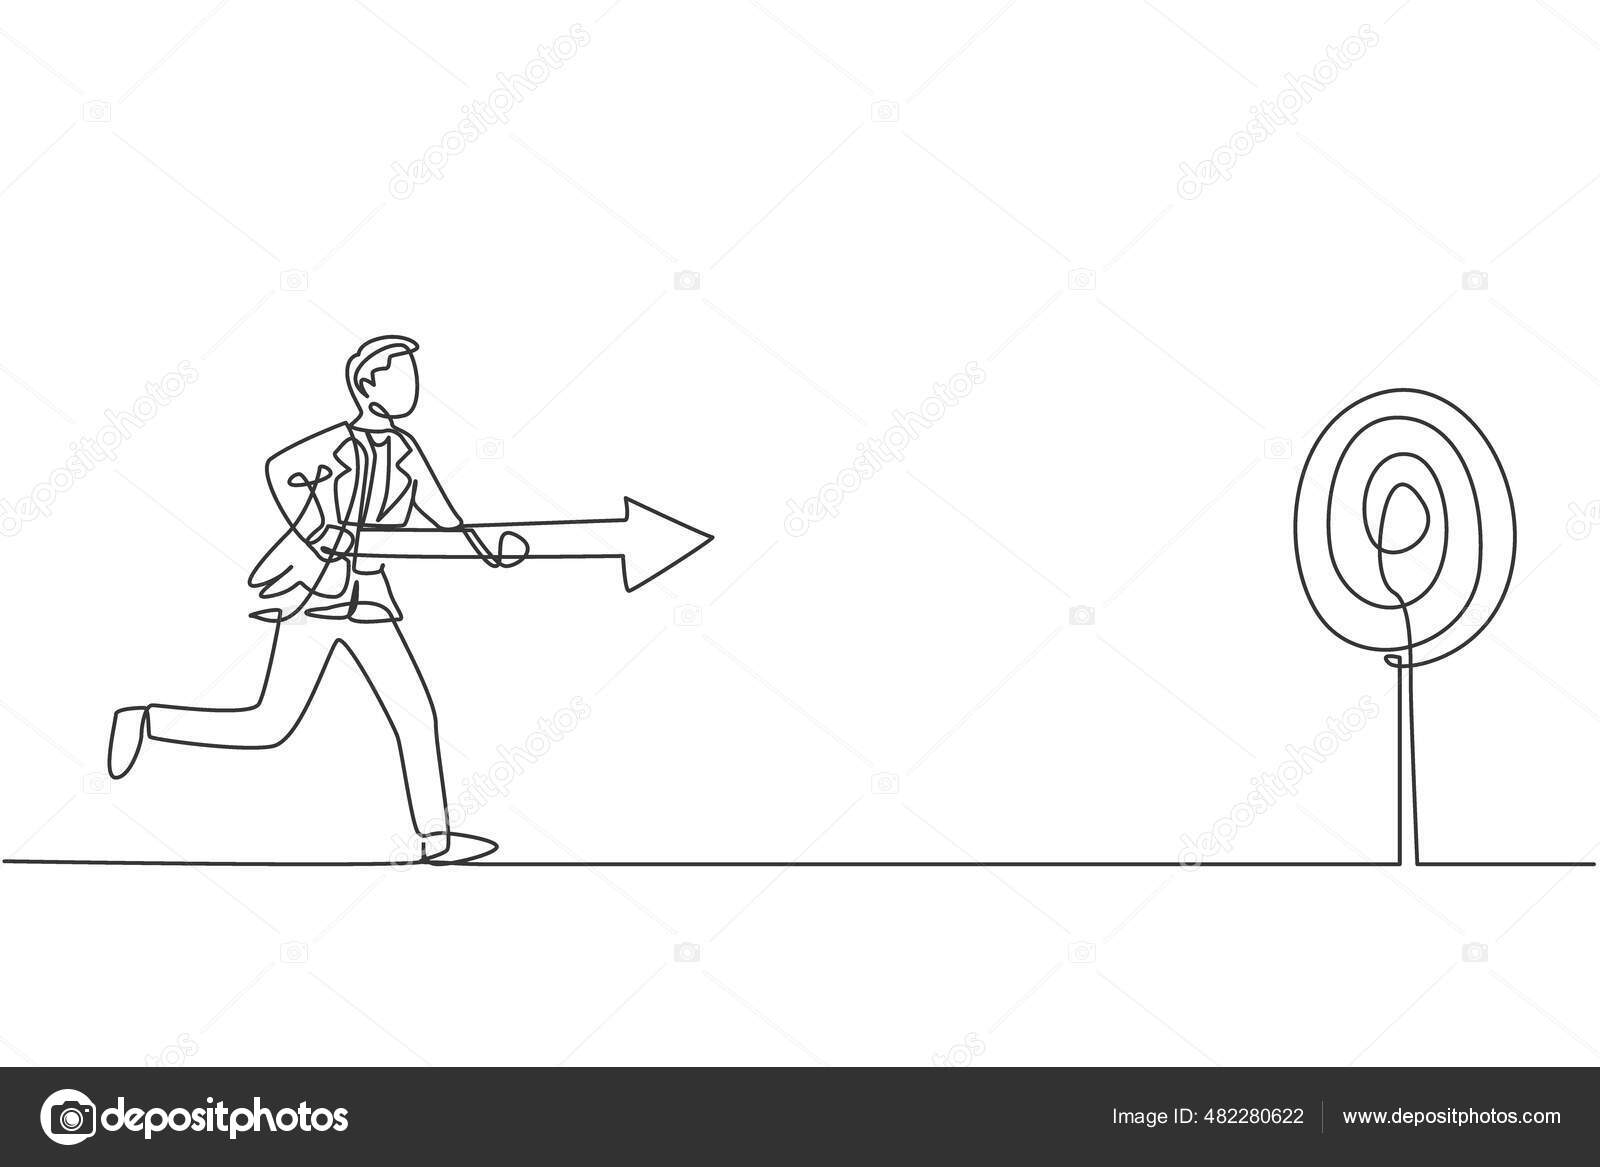 Hand Drawn Line Art Sketch Of Manager Showing A Puzzled Colleague The Way  To The Top. Business Metaphor For Encouragement, Leadership, Obstacle, Path  To Goal, Challenge, Growth, Conquering Adversity. Stock Photo, Picture